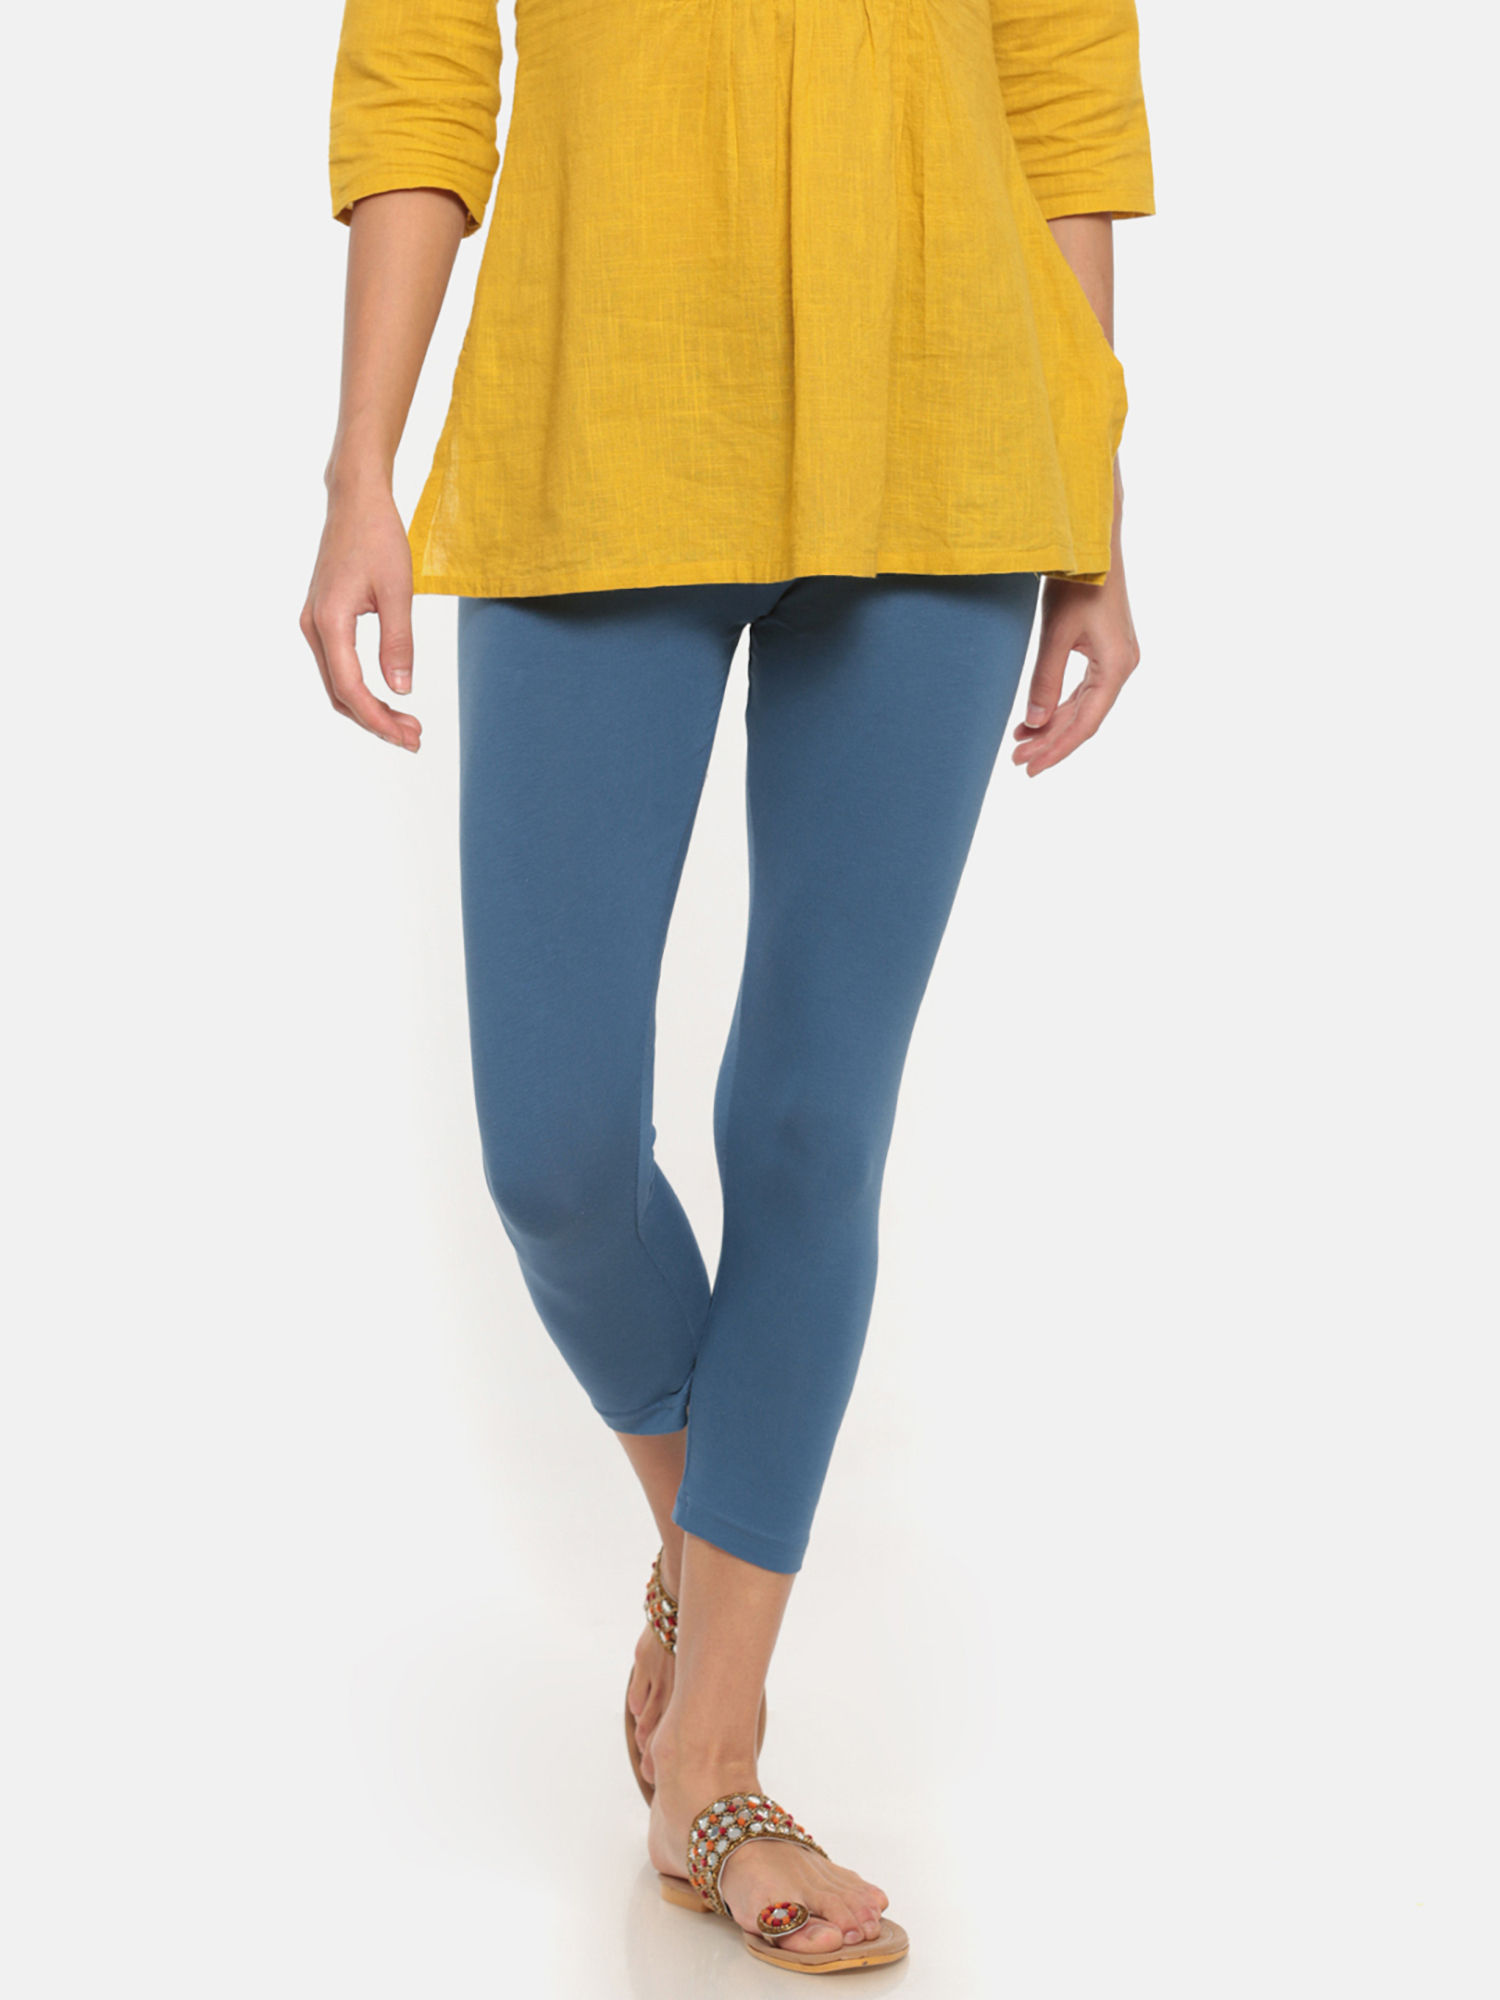 Mok musicus apotheker Go Colors Jean Blue Legging Cropped (S): Buy Go Colors Jean Blue Legging  Cropped (S) Online at Best Price in India | Nykaa